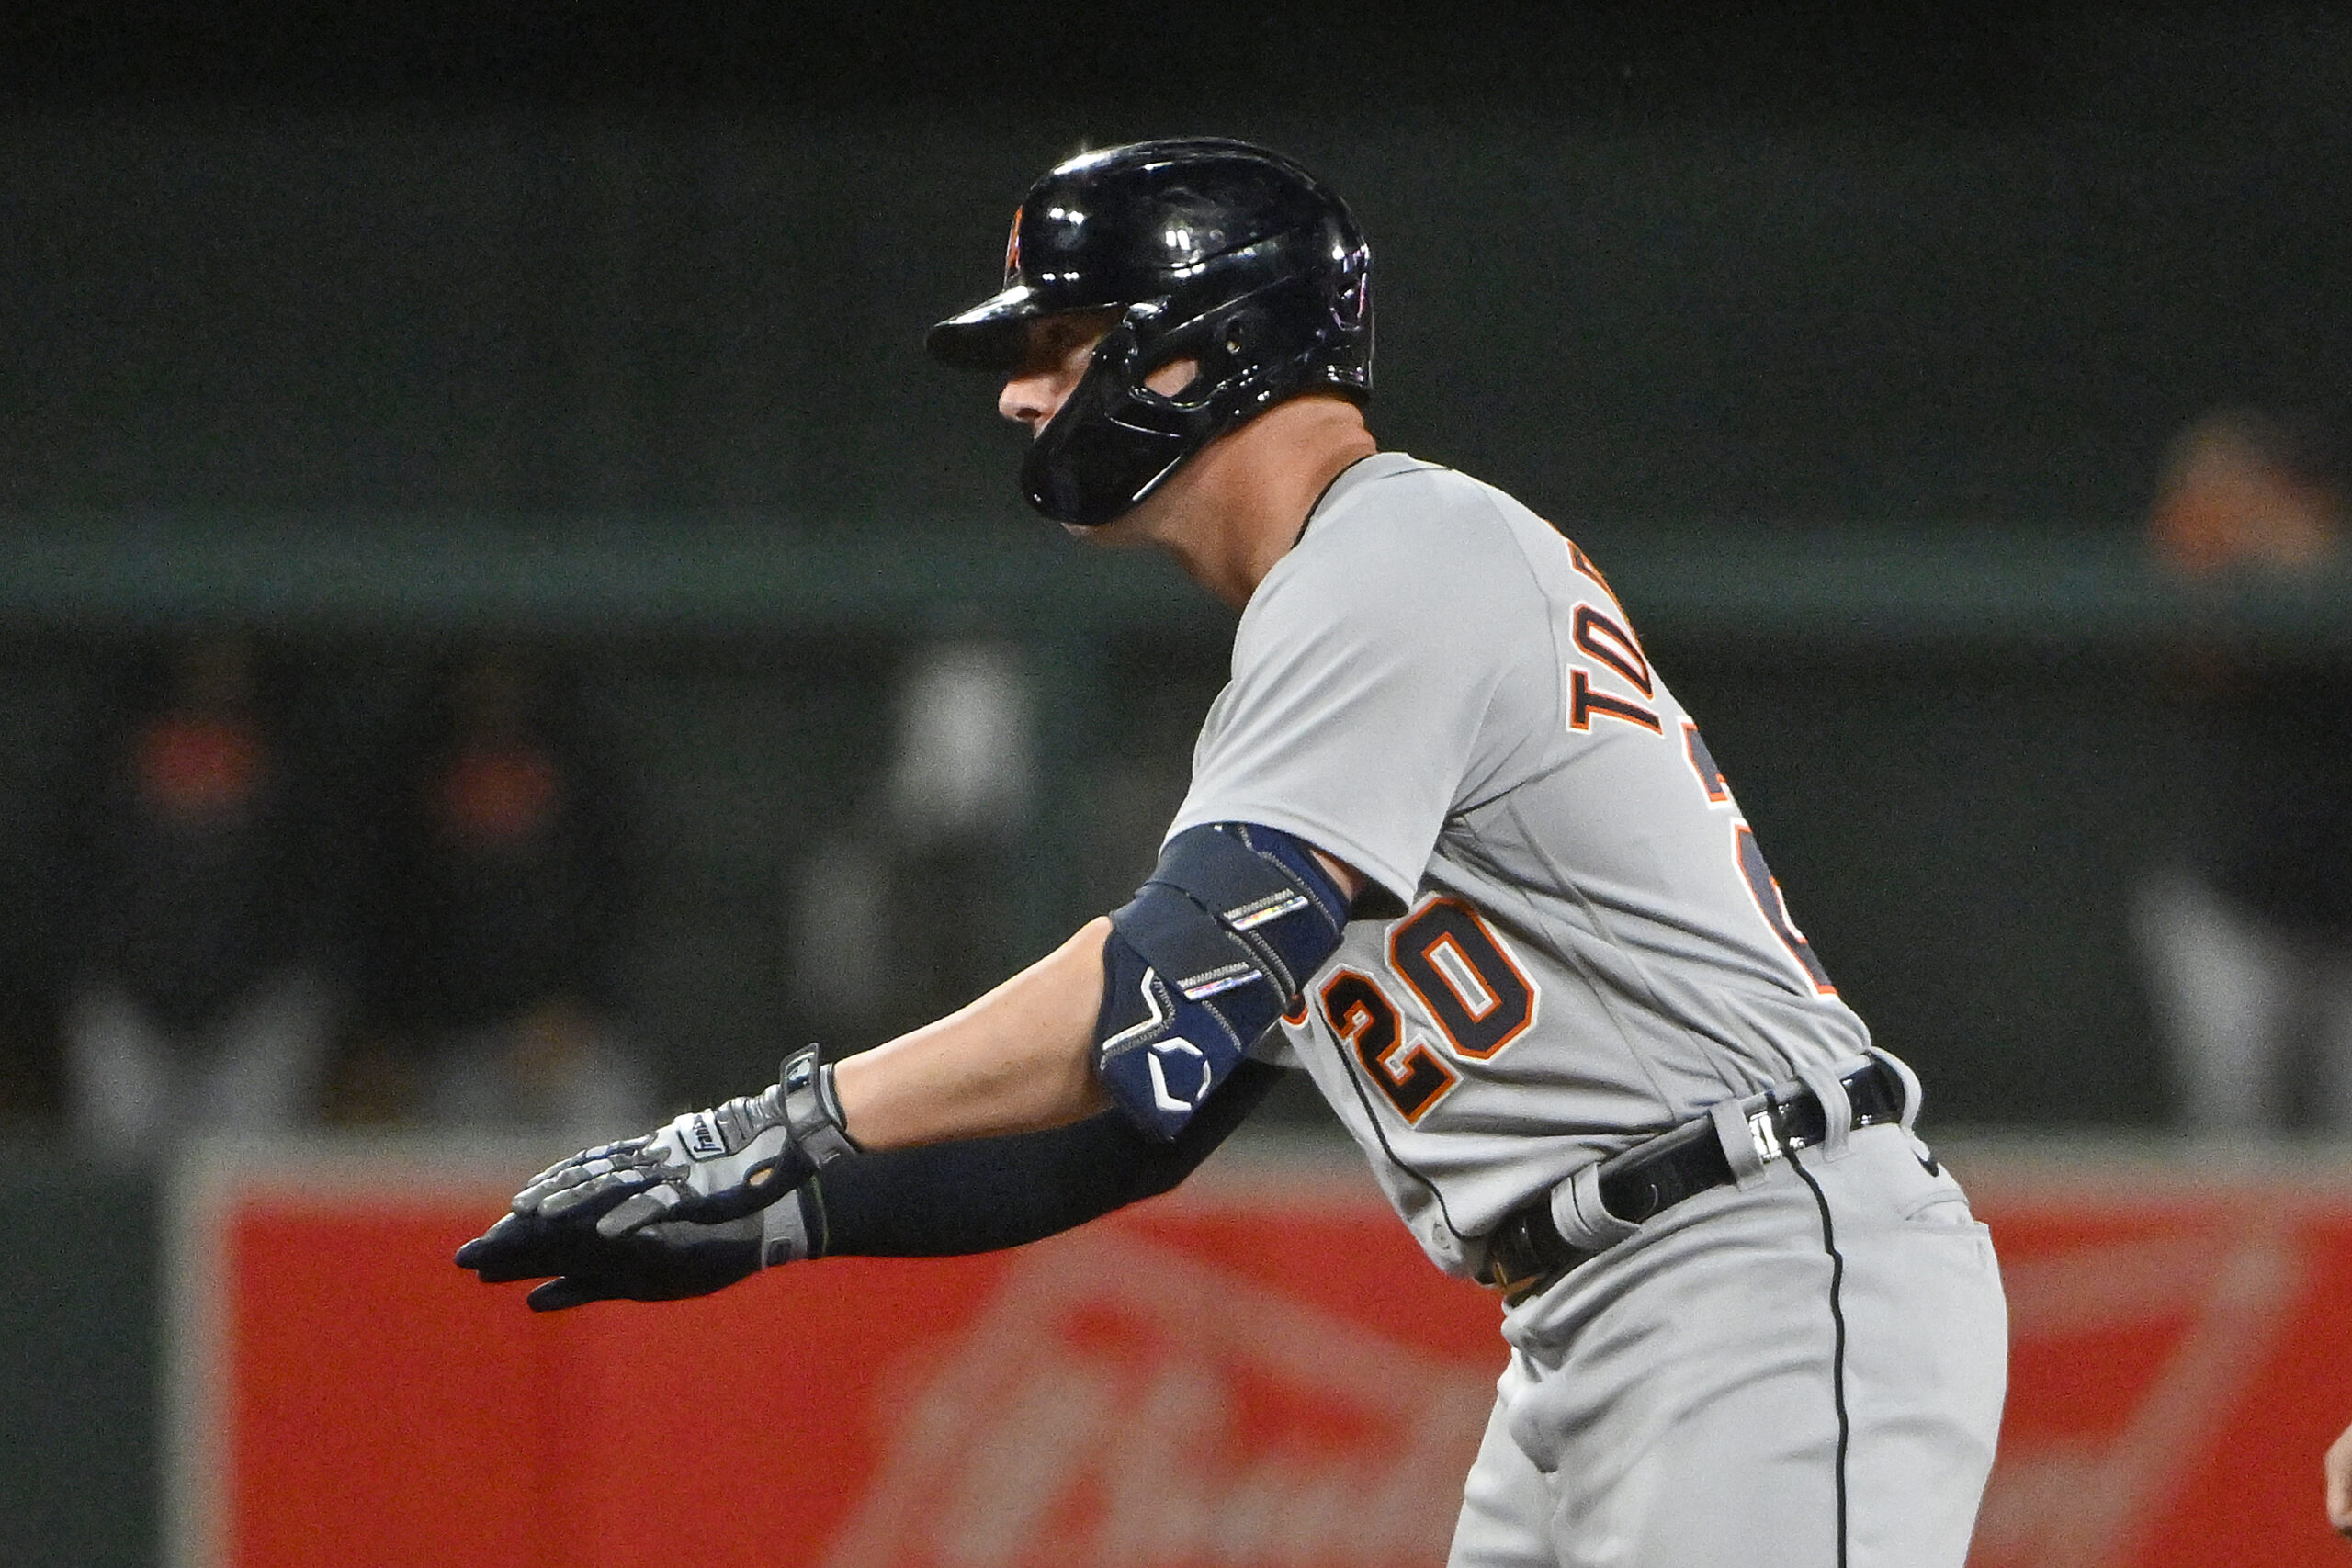 Detroit Tigers' Spencer Torkelson walks to his position at first